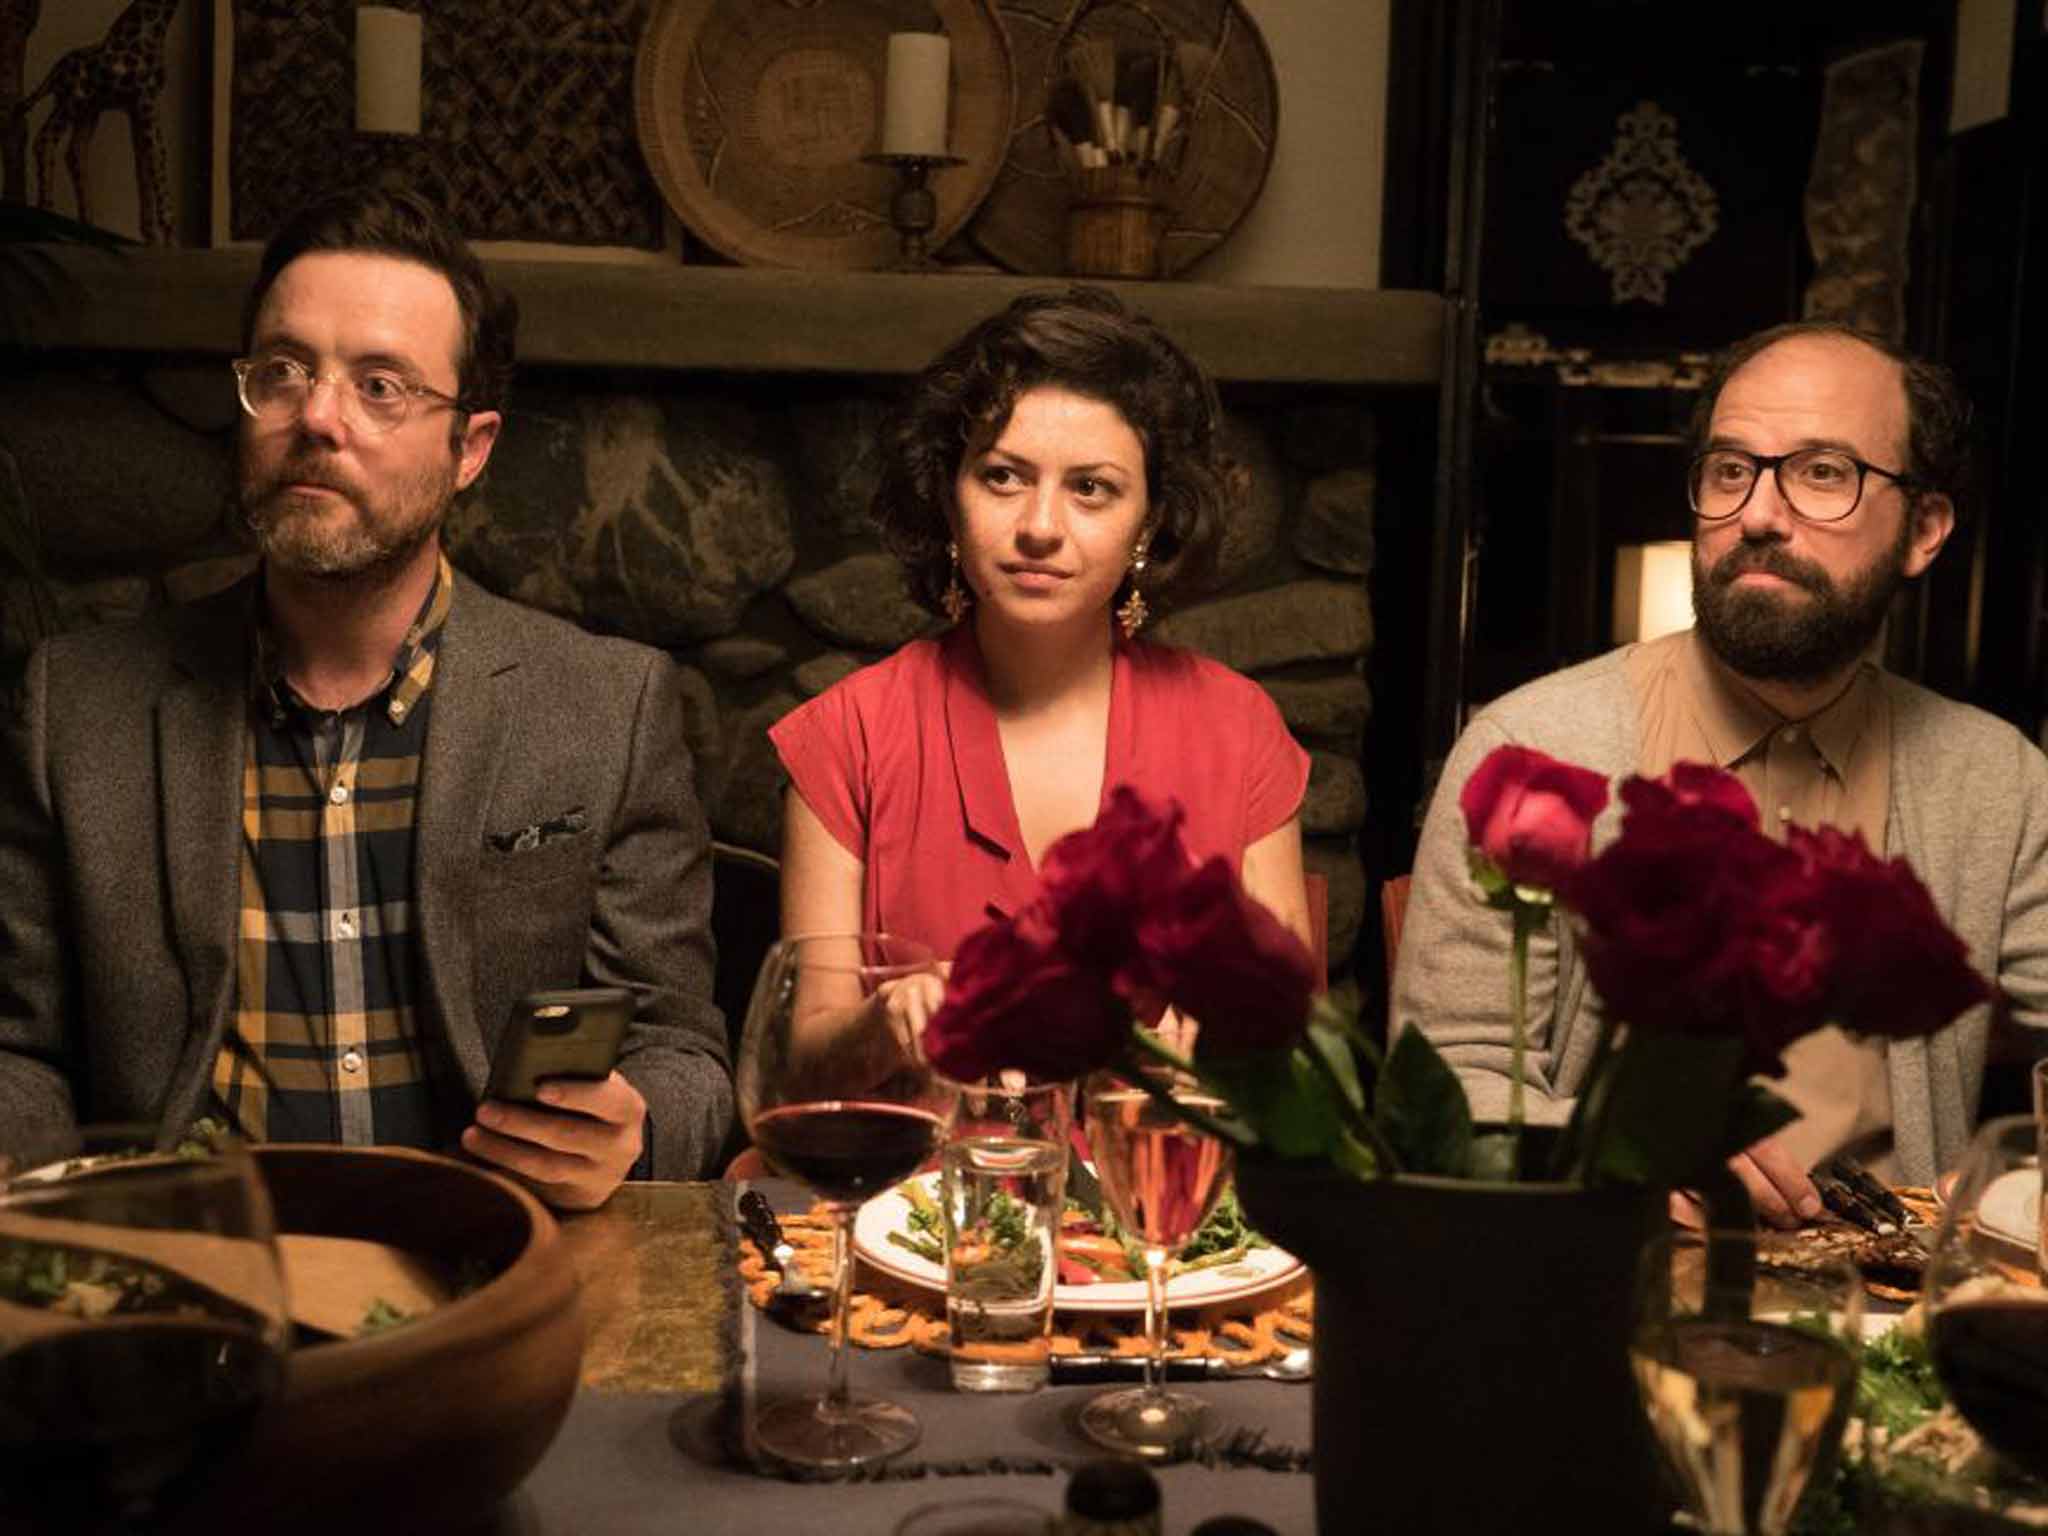 Feast for the eyes: an episode of 'The New Yorker Presents' starring Jon Daly, Alia Shaukat and Brett Gelman